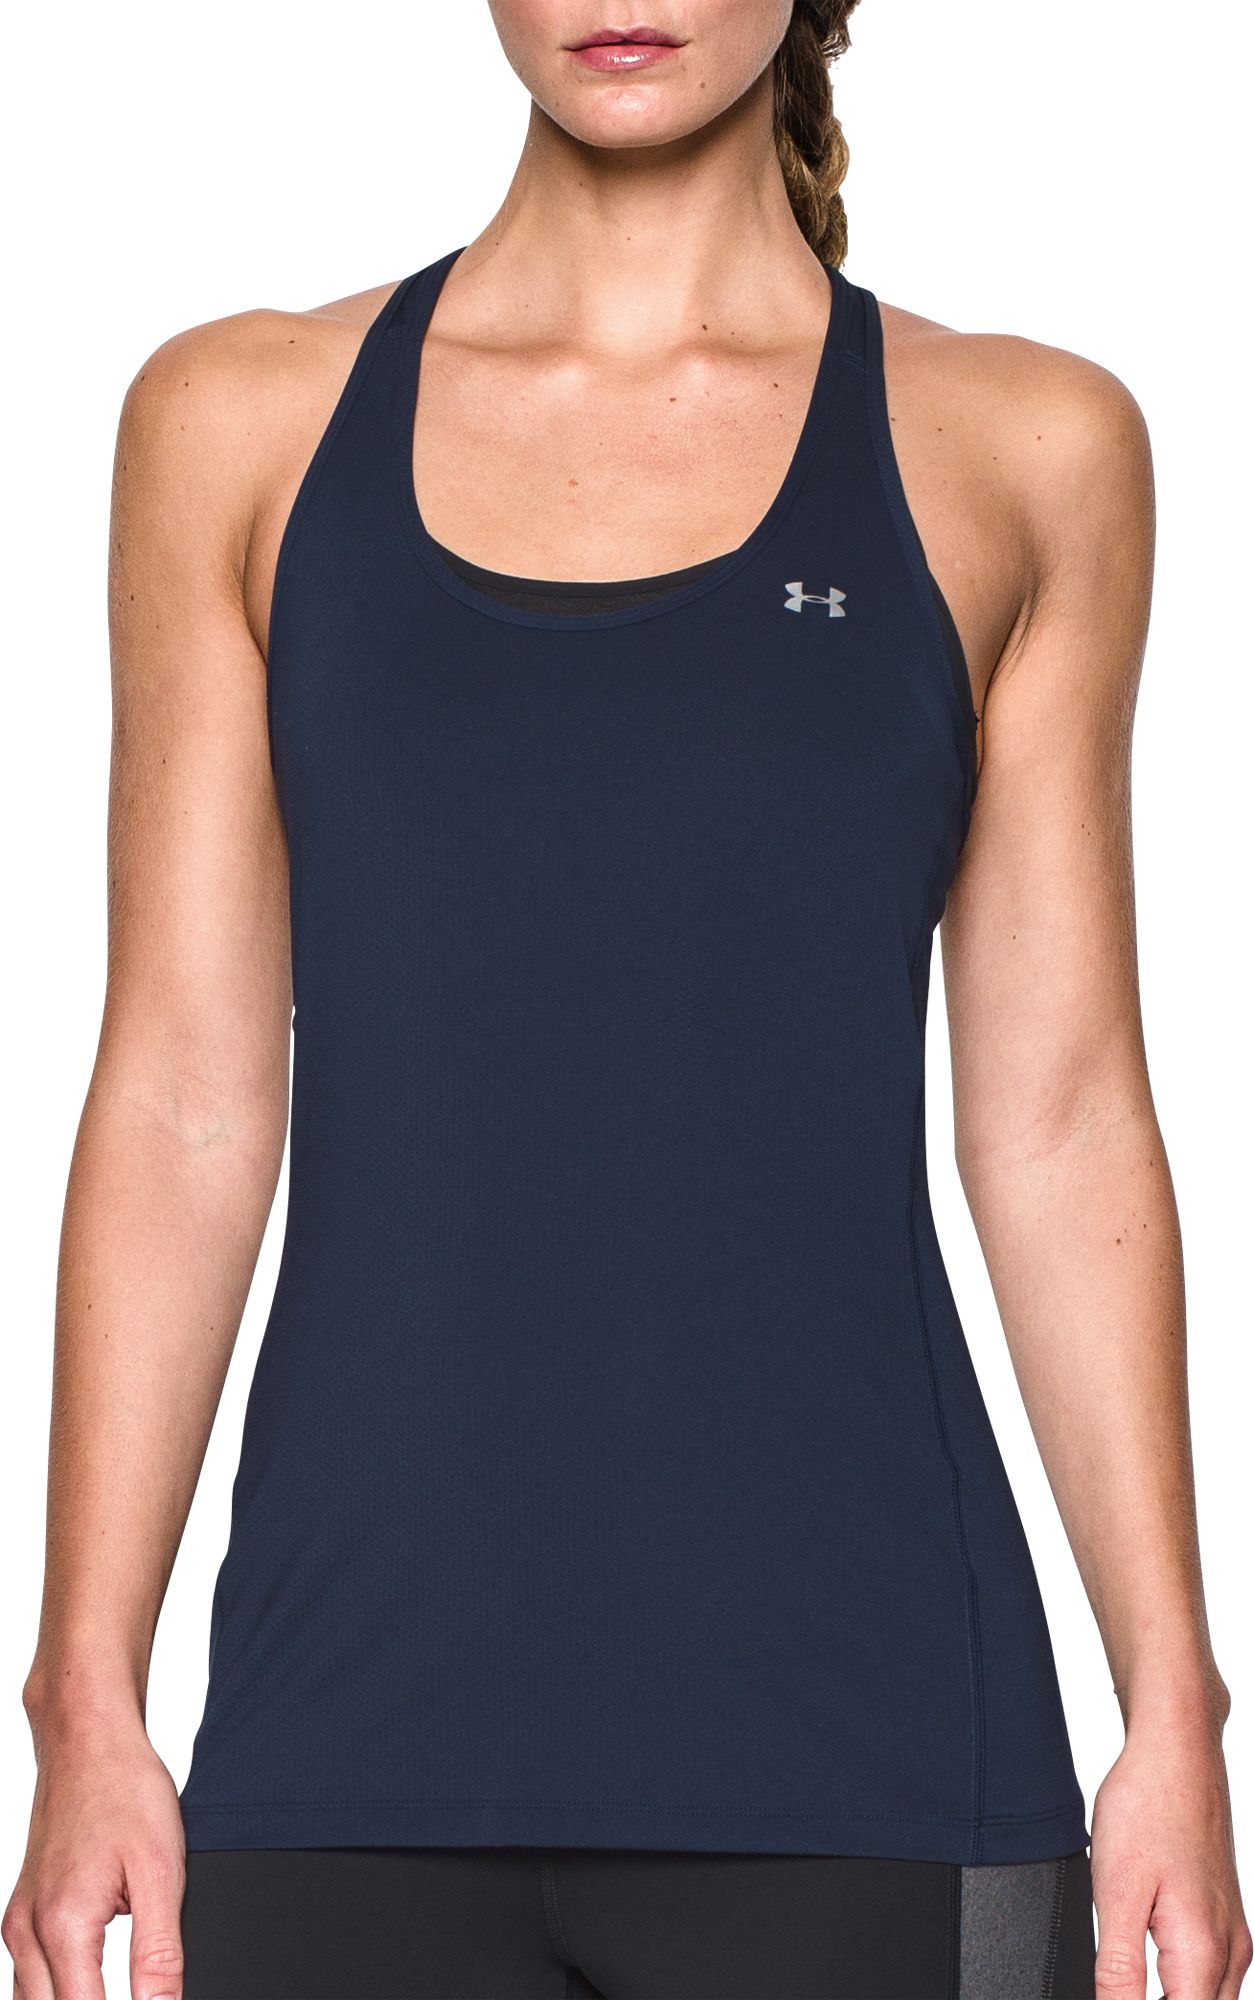 Women's Compression Shirts & Tops | DICK'S Sporting Goods